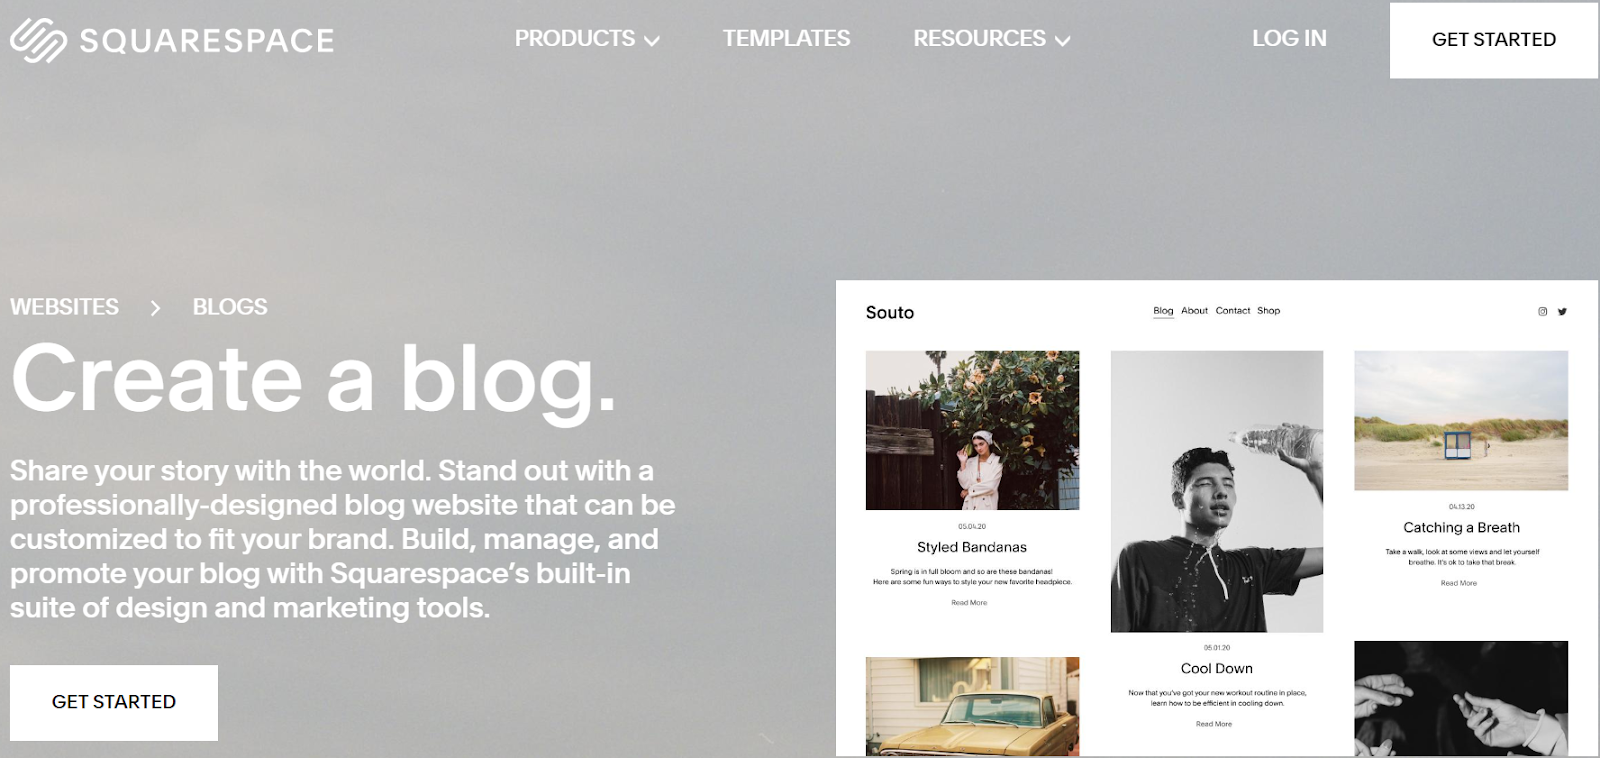 Squarespace for Blogs